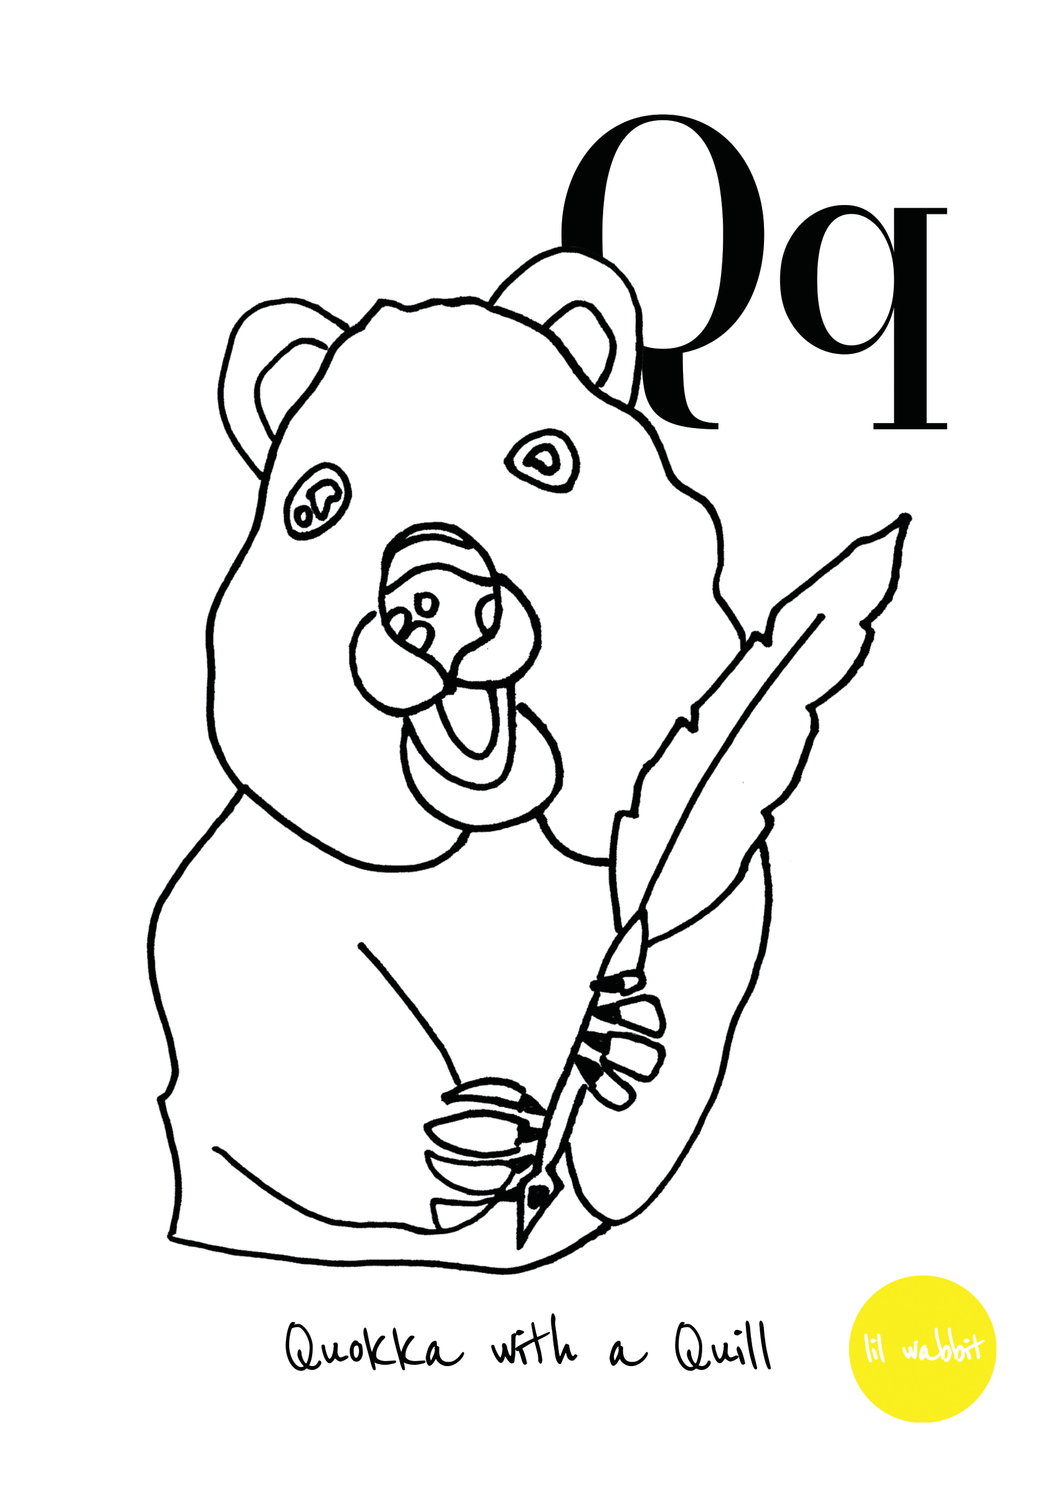 A black animal outline ready to colour in of a quokka with a quill